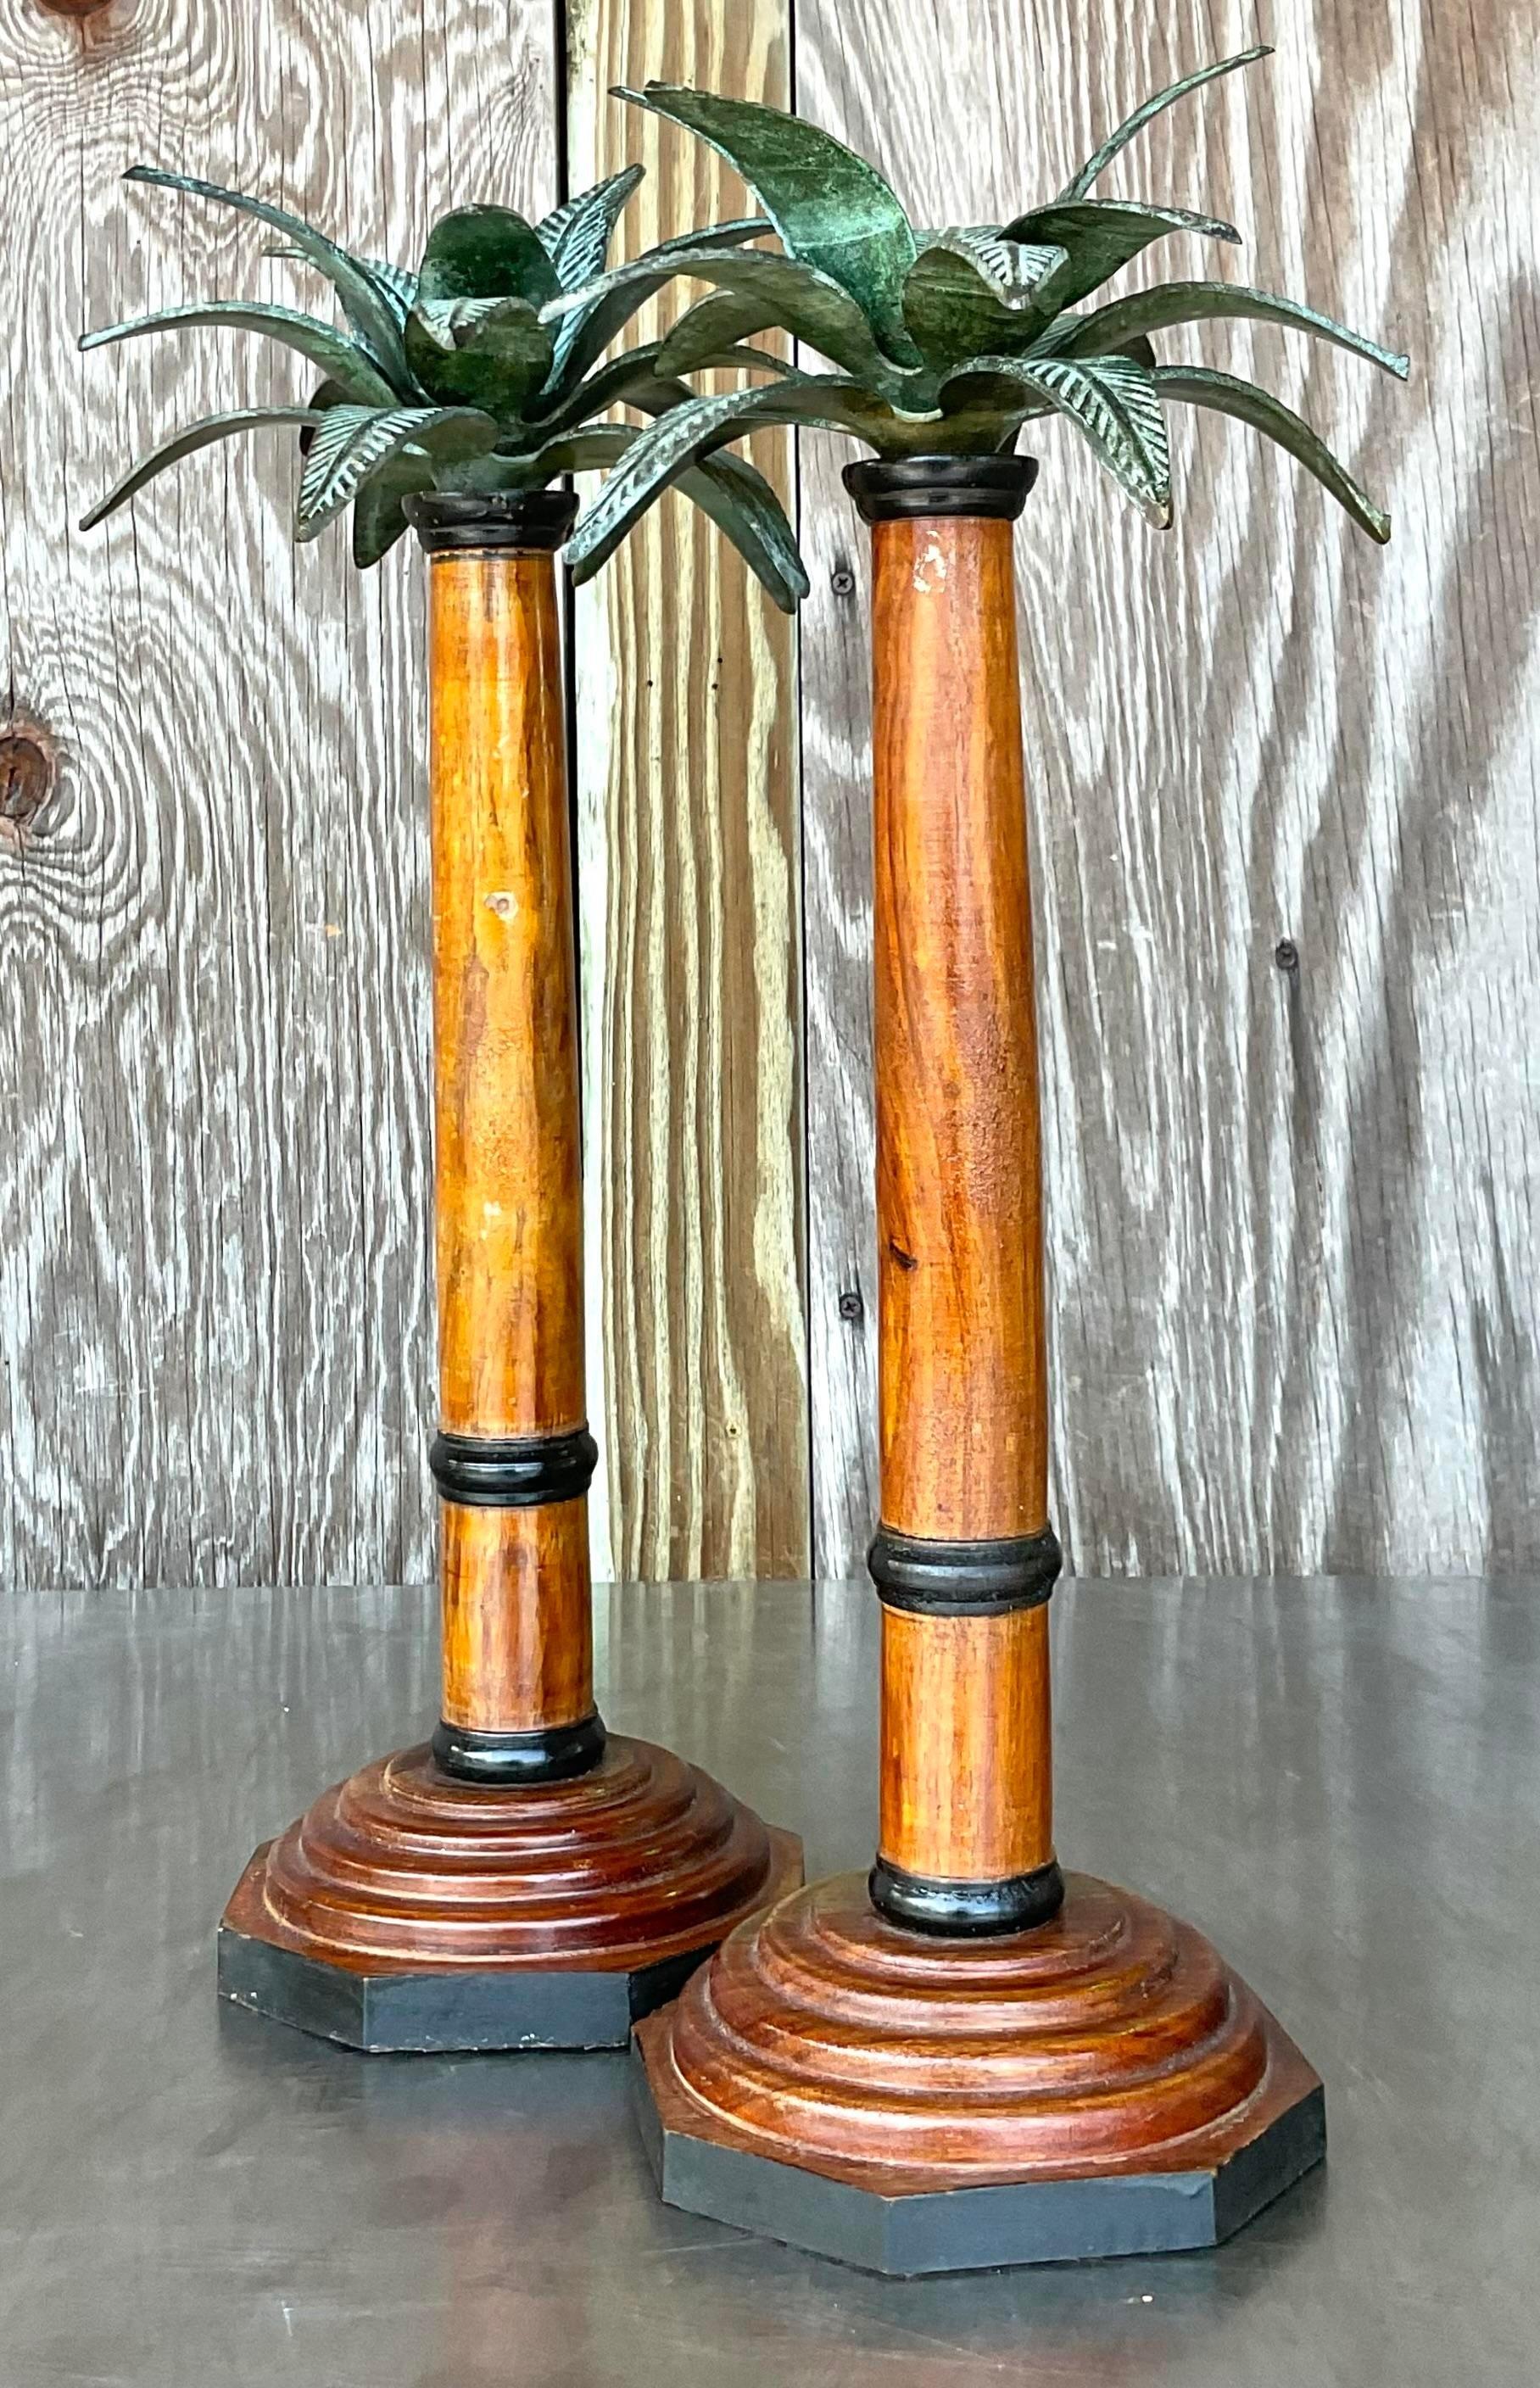 Add a touch of coastal charm to your home with this pair of Vintage Palm Tree Candlesticks. Crafted with American craftsmanship, their palm tree design evokes seaside serenity and tropical allure, perfect for illuminating your space with a touch of